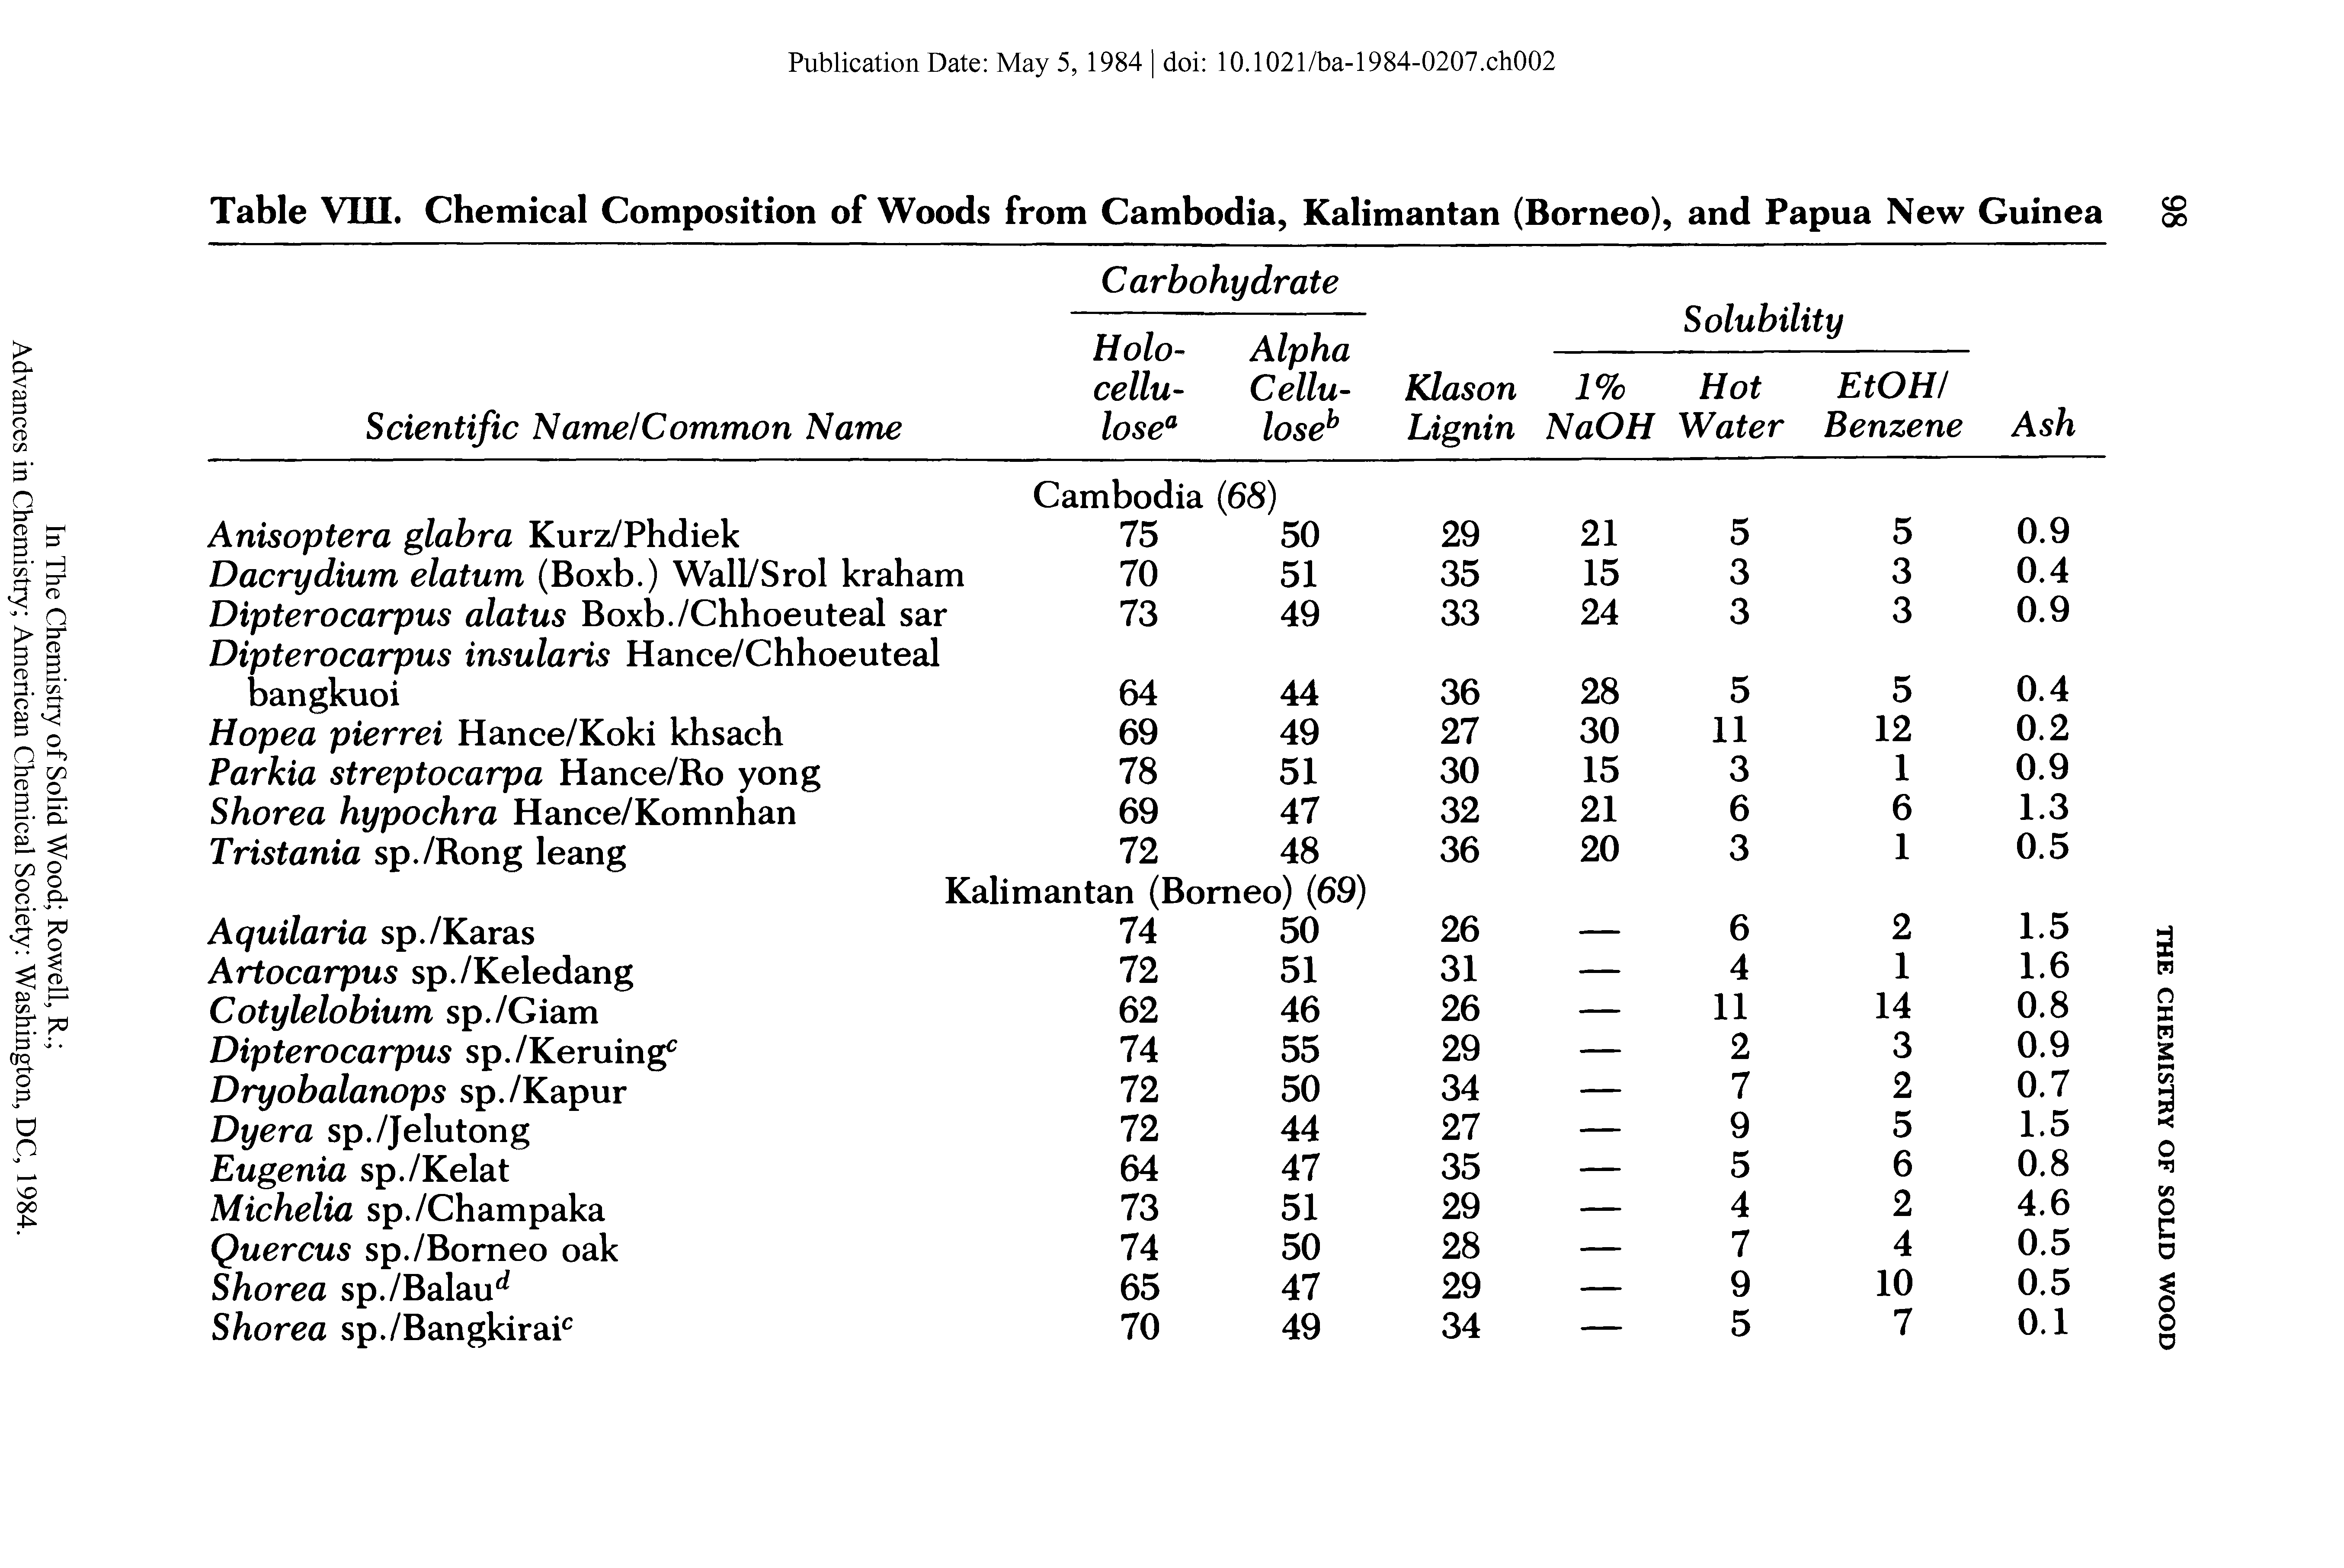 Table VIII. Chemical Composition of Woods from Cambodia, Kalimantan (Borneo), and Papua New Guinea...